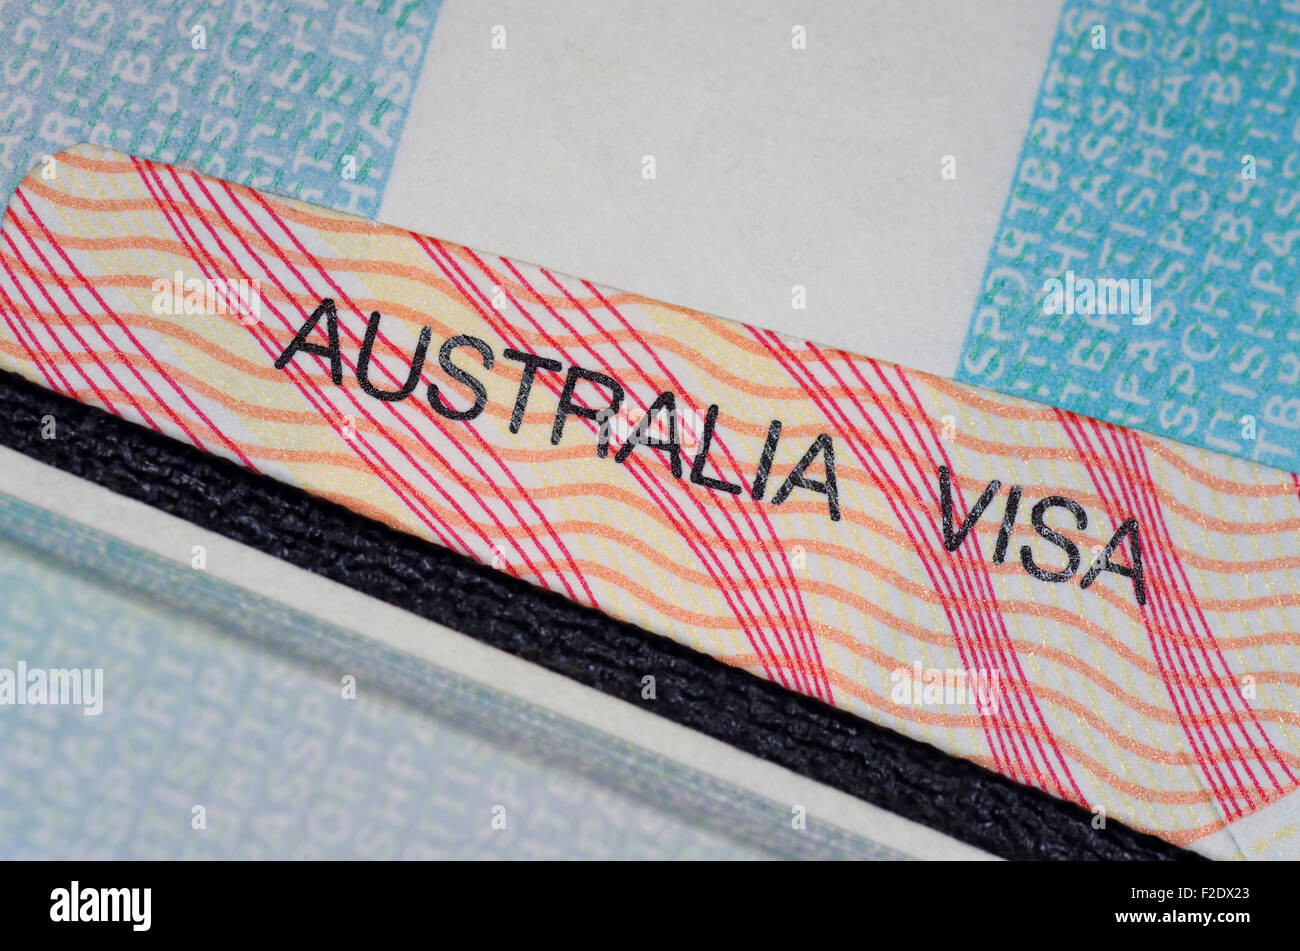 australian immigration visa and passport pages close up view Stock Photo